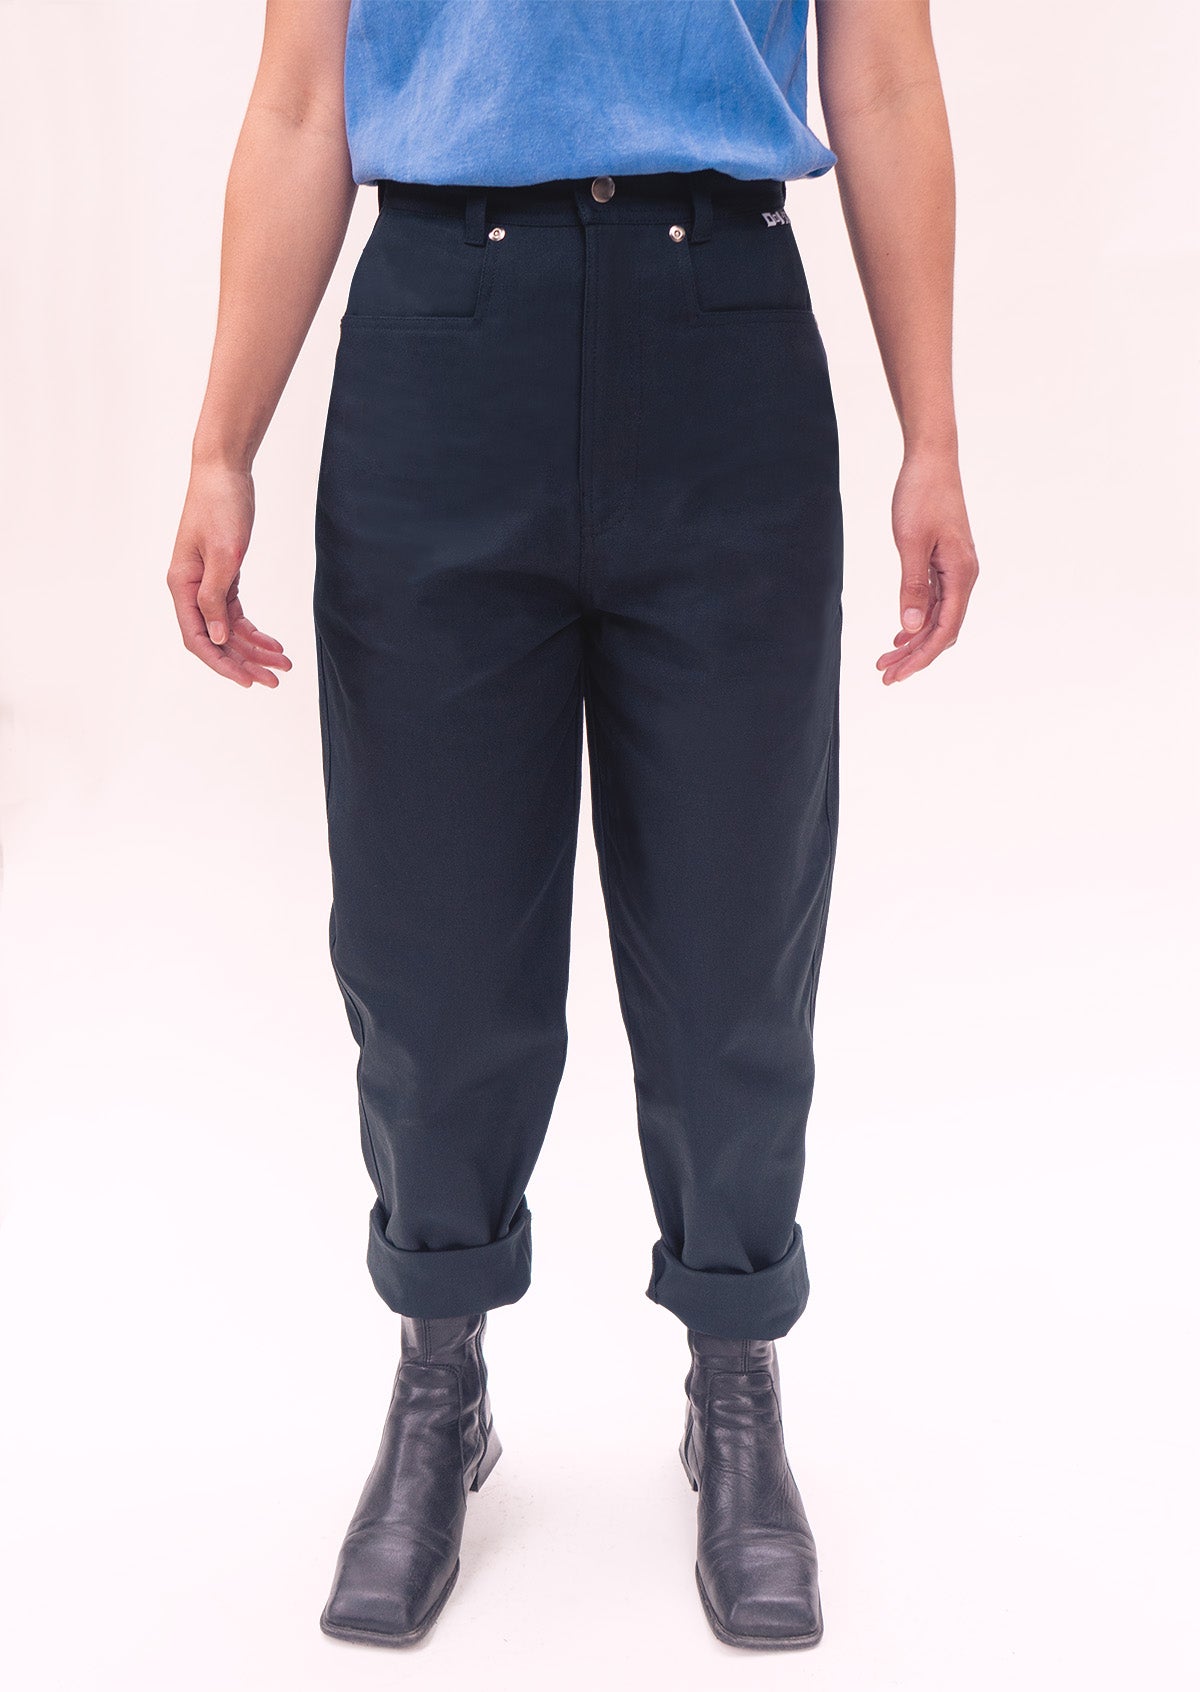 High waisted Pants for Women - Made to Measure